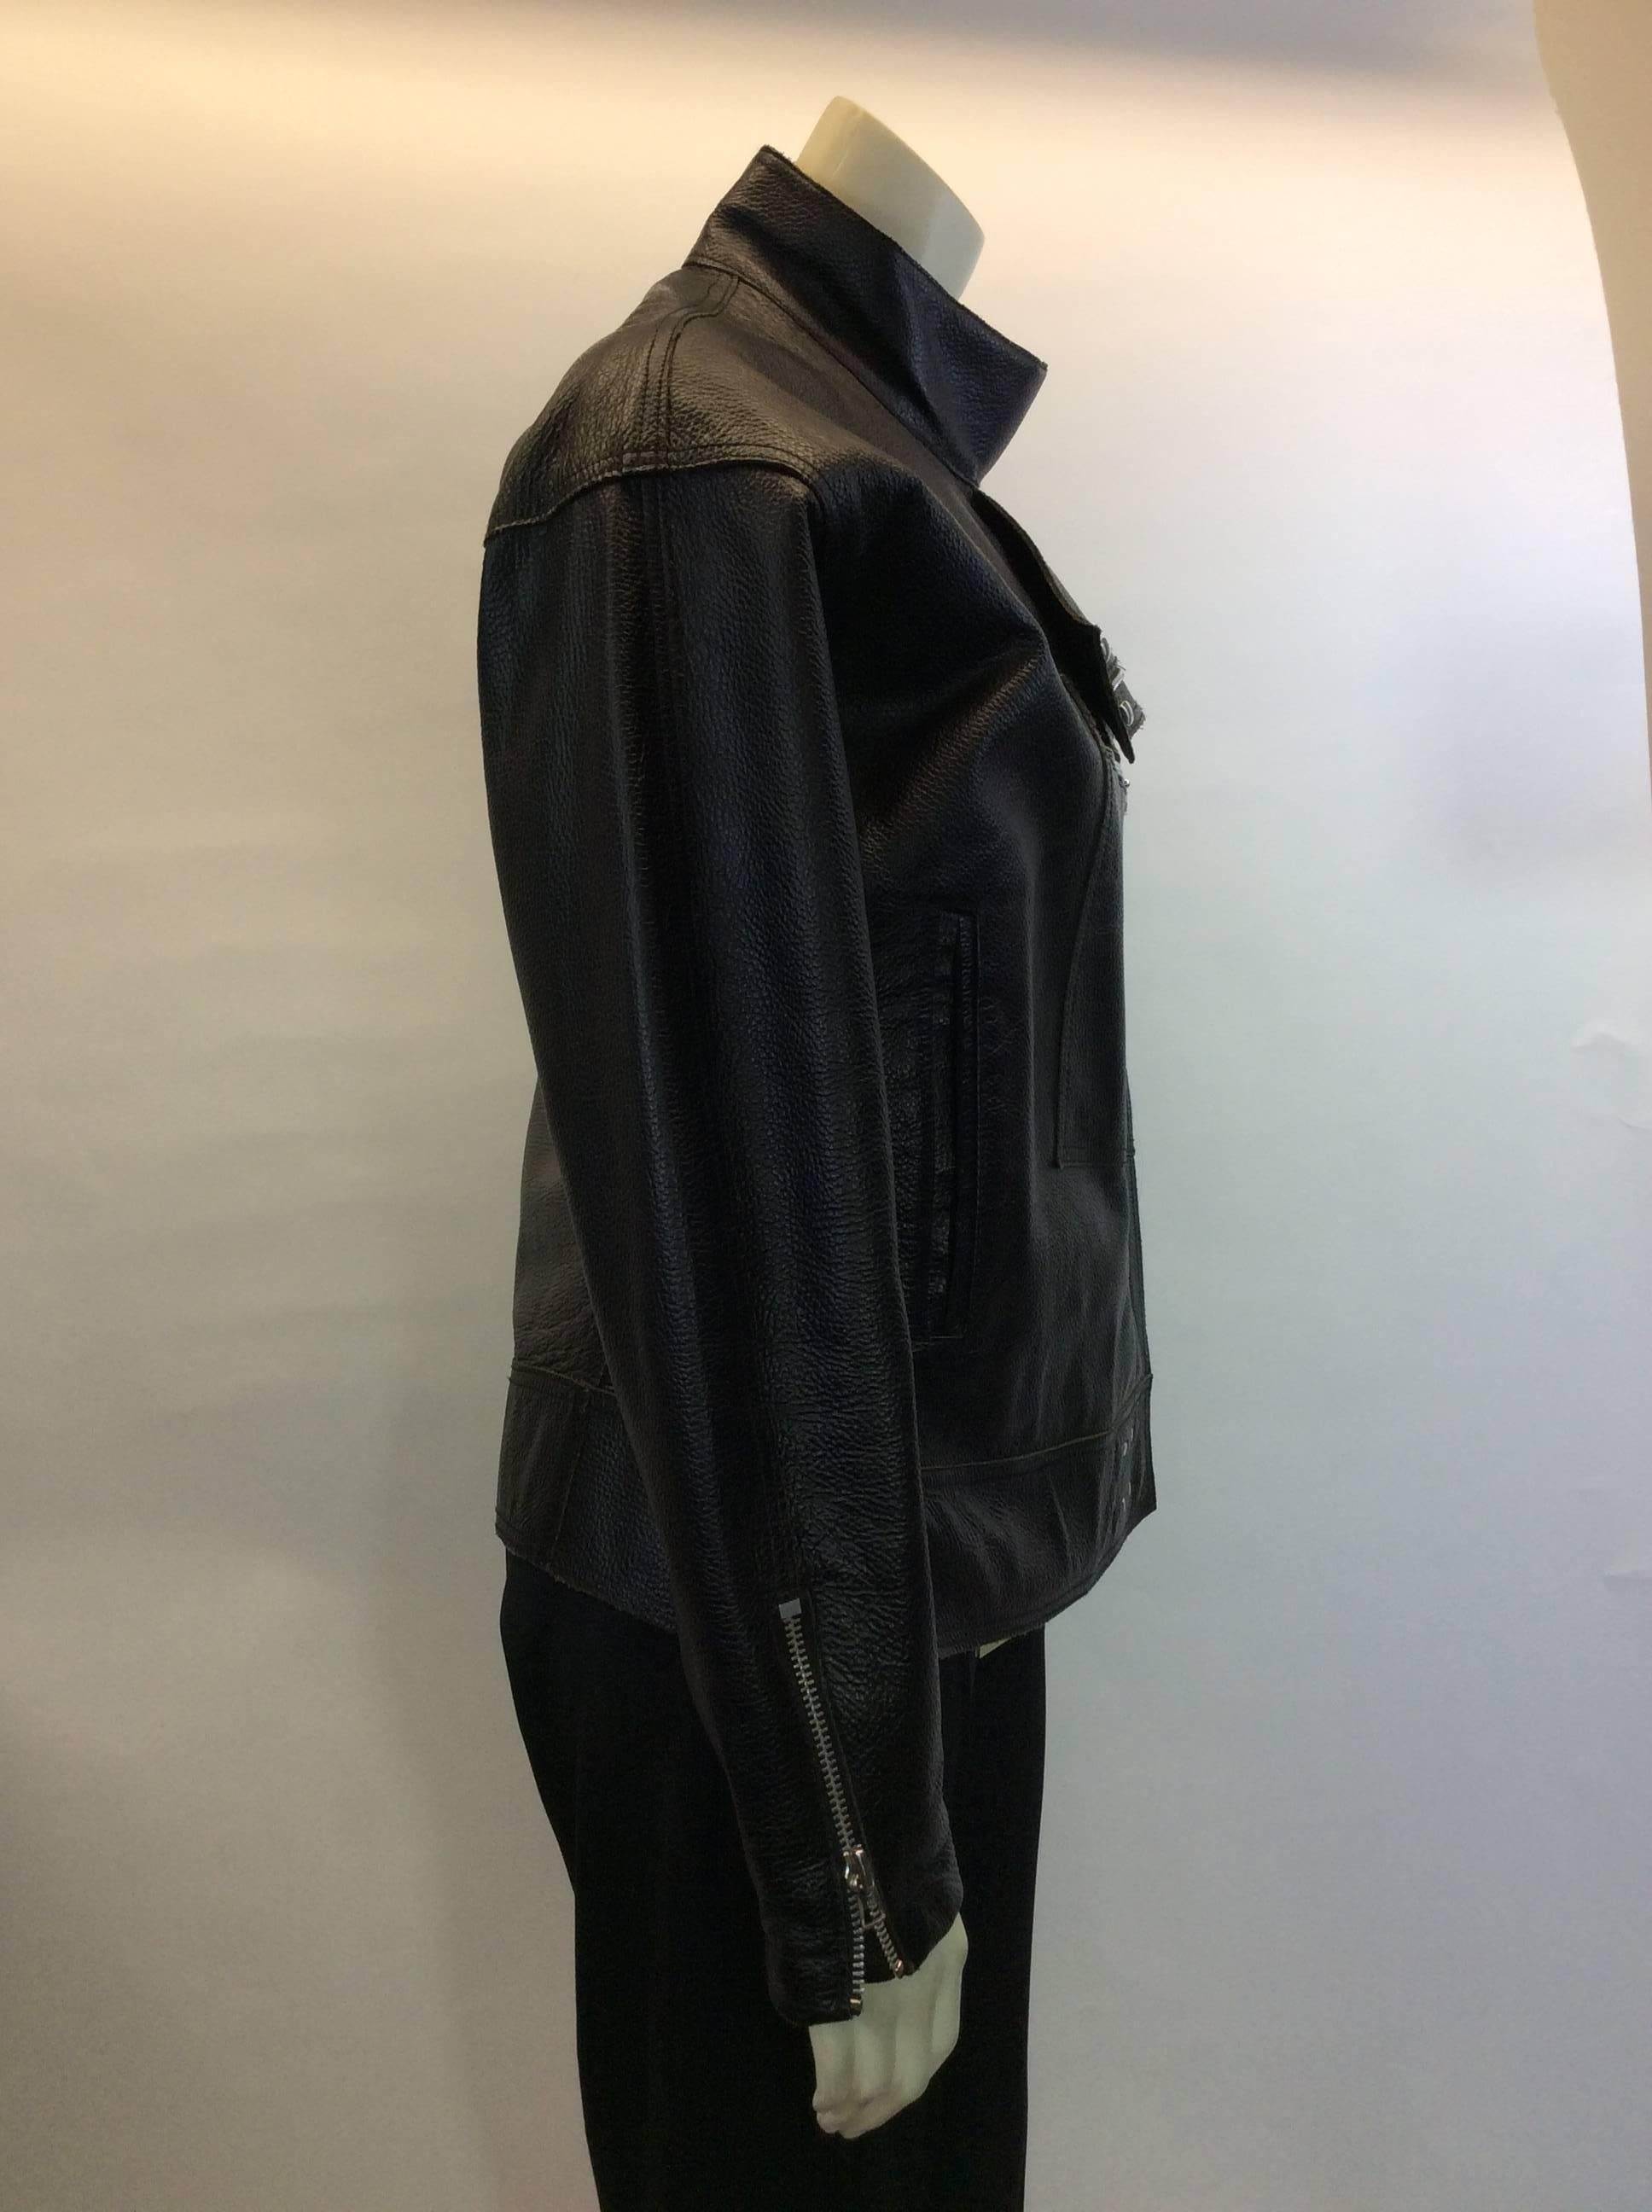 Boxy Convertible Leather Moto Jacket
Includes 3 button front closure, as well as zipper closure
Collar and waistband feature two hook and eye closures
Includes two hip pockets and one interior chest pocket
Size Medium
100% Leather